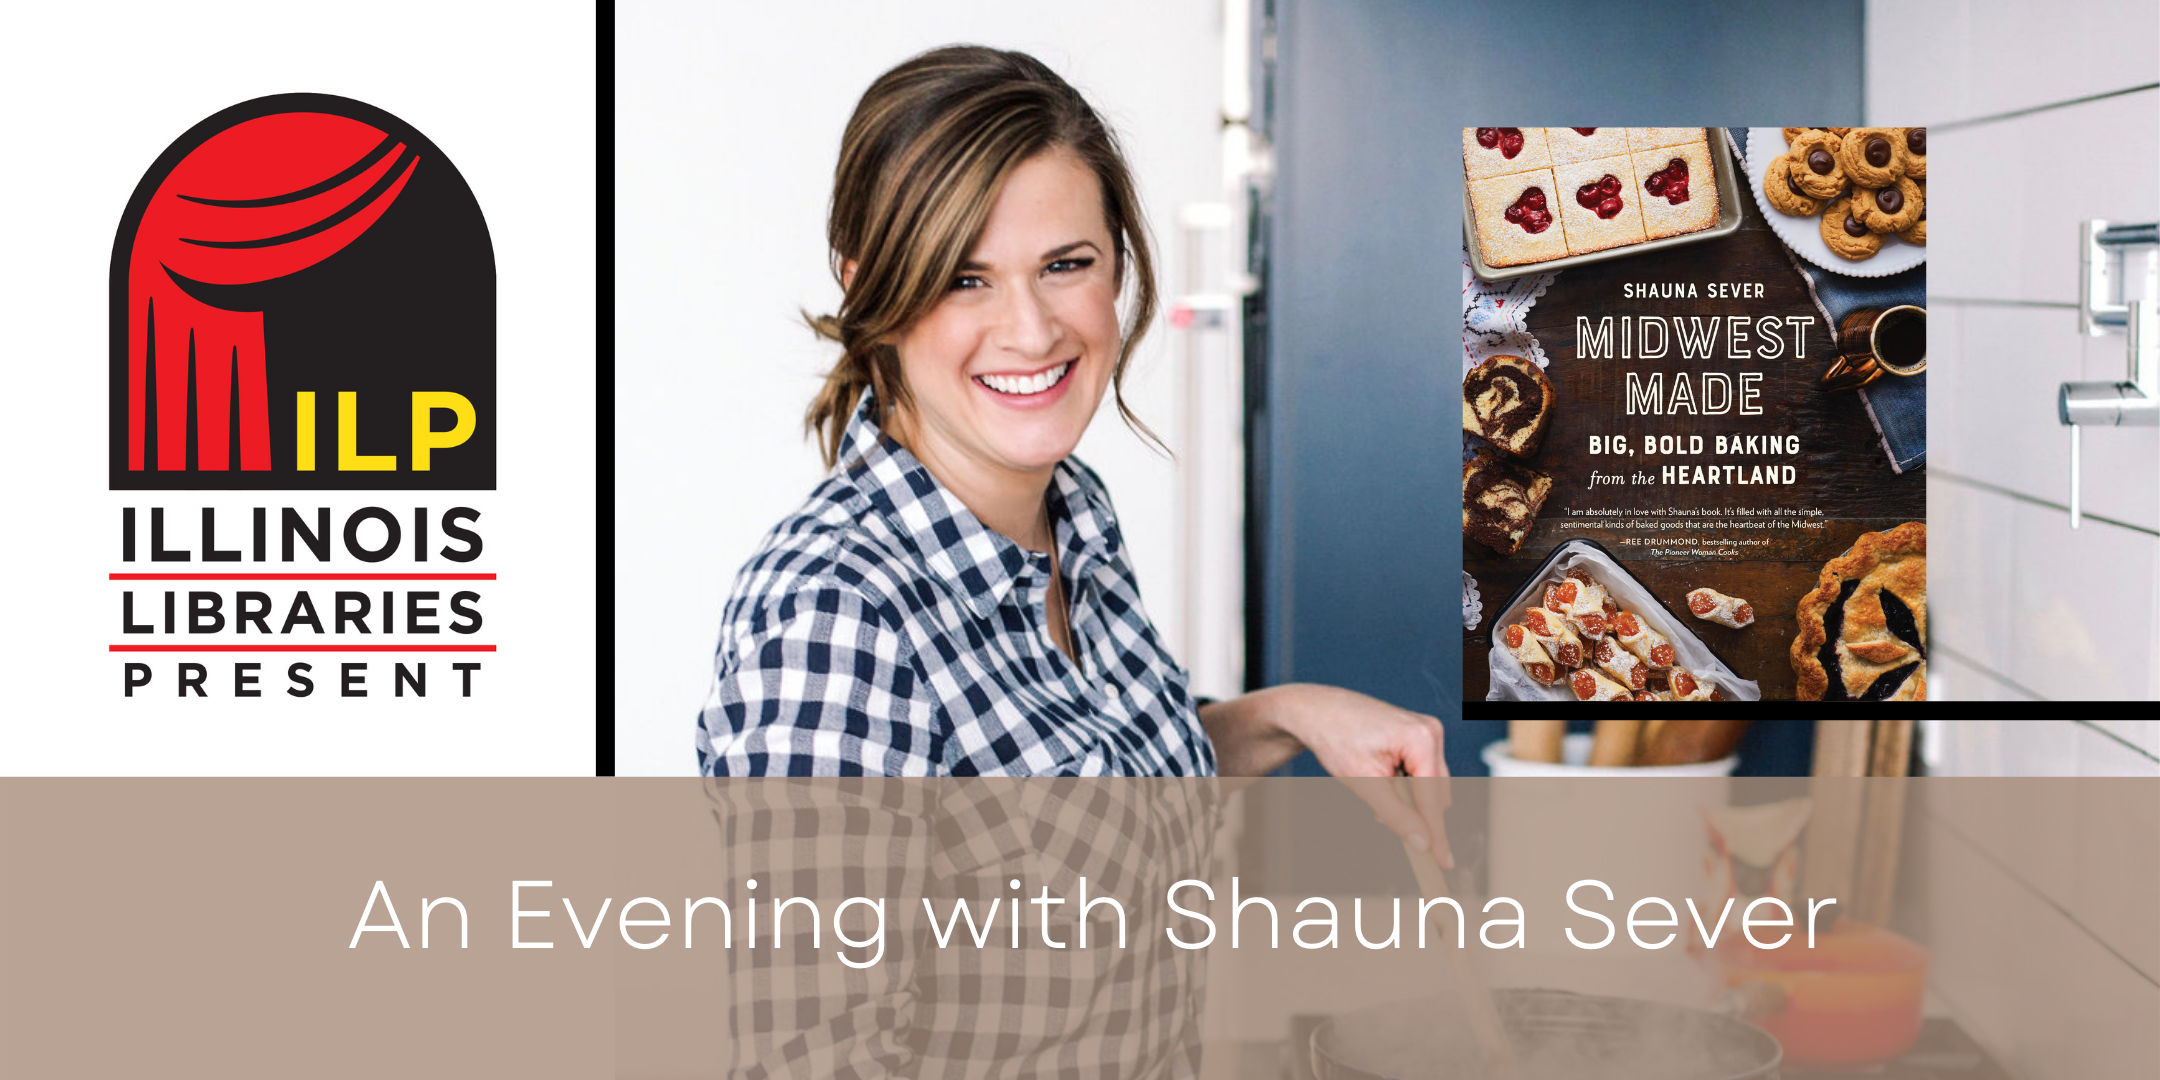 Image of "Illinois Libraries Present: Midwest Baking with Shauna Sever""